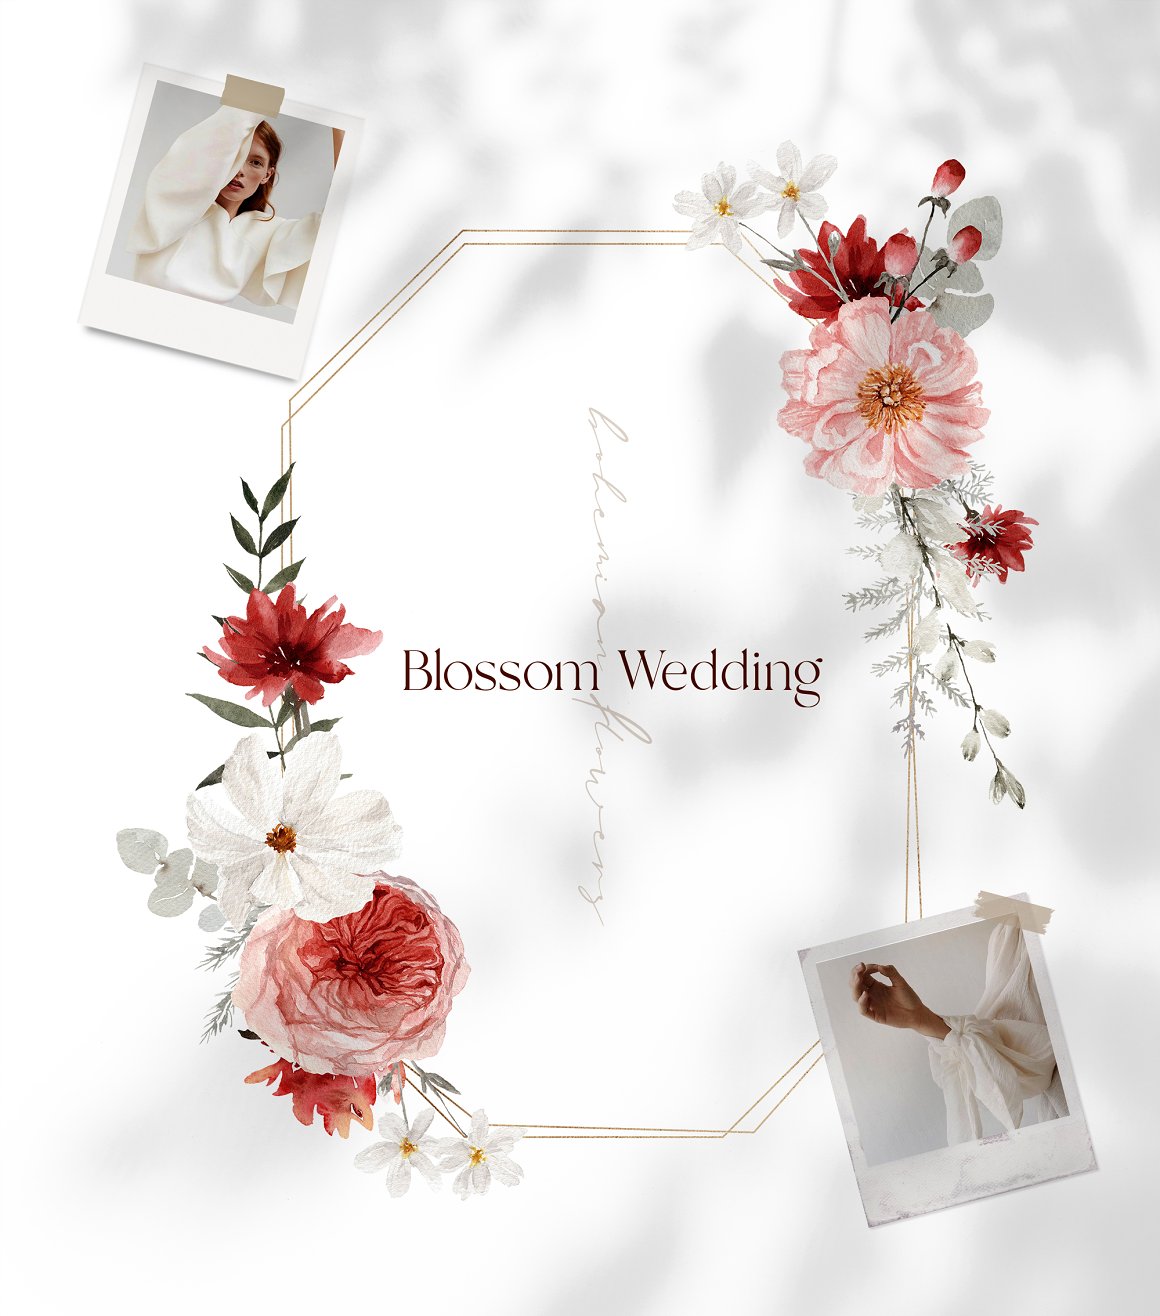 Brown lettering "Blossom Wedding" and frame with floral compositions and 2 polaroid photos.